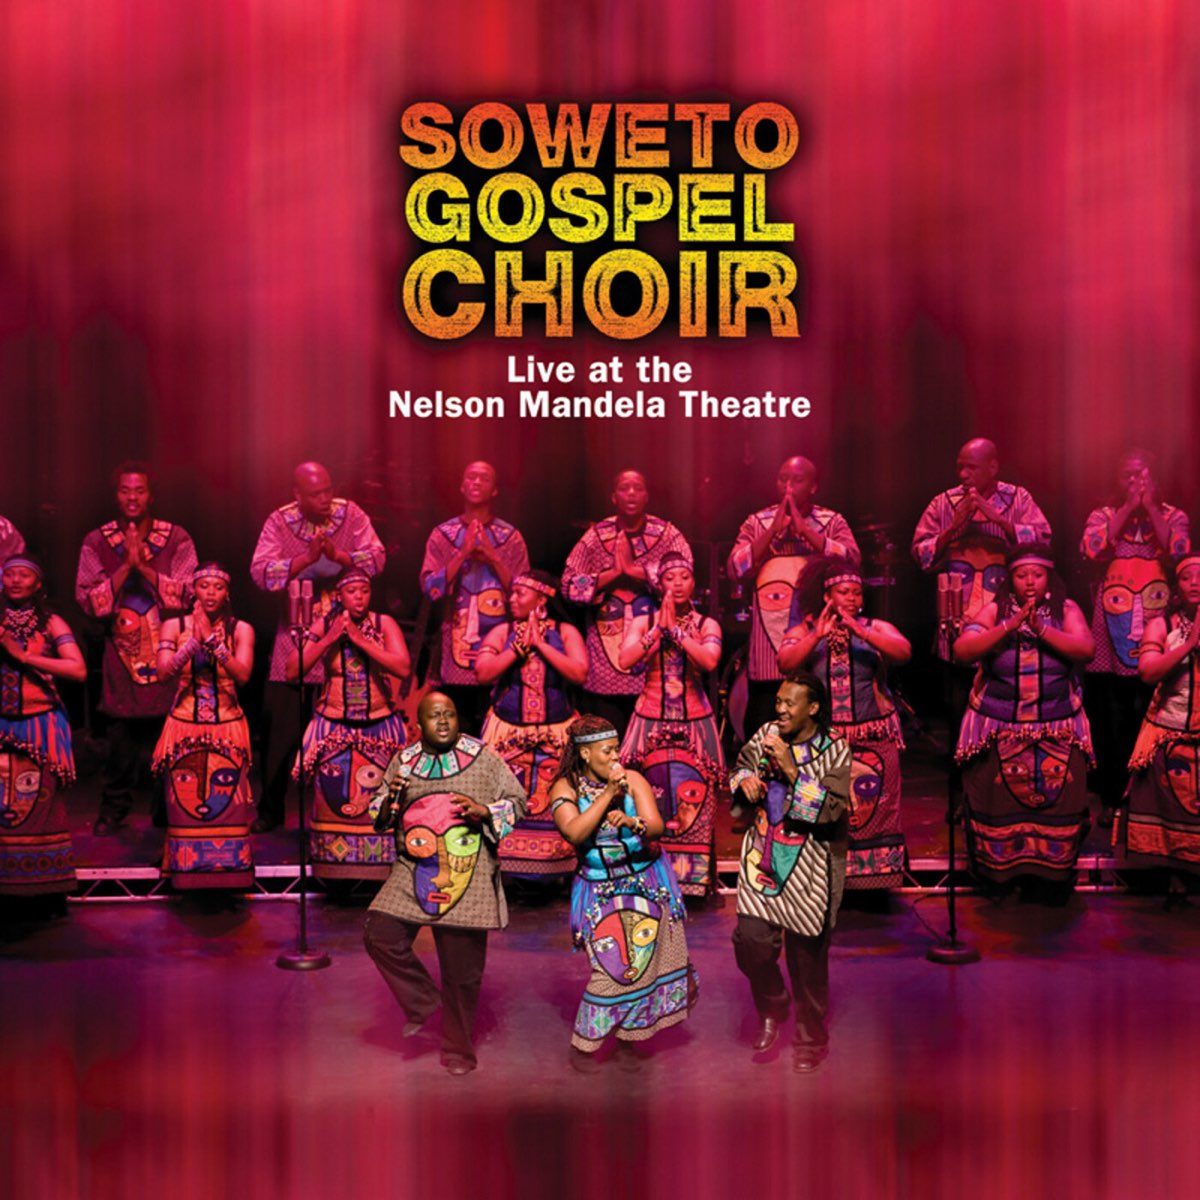 Live at the Nelson Mandela Theatre by Soweto Gospel Choir on Apple Music